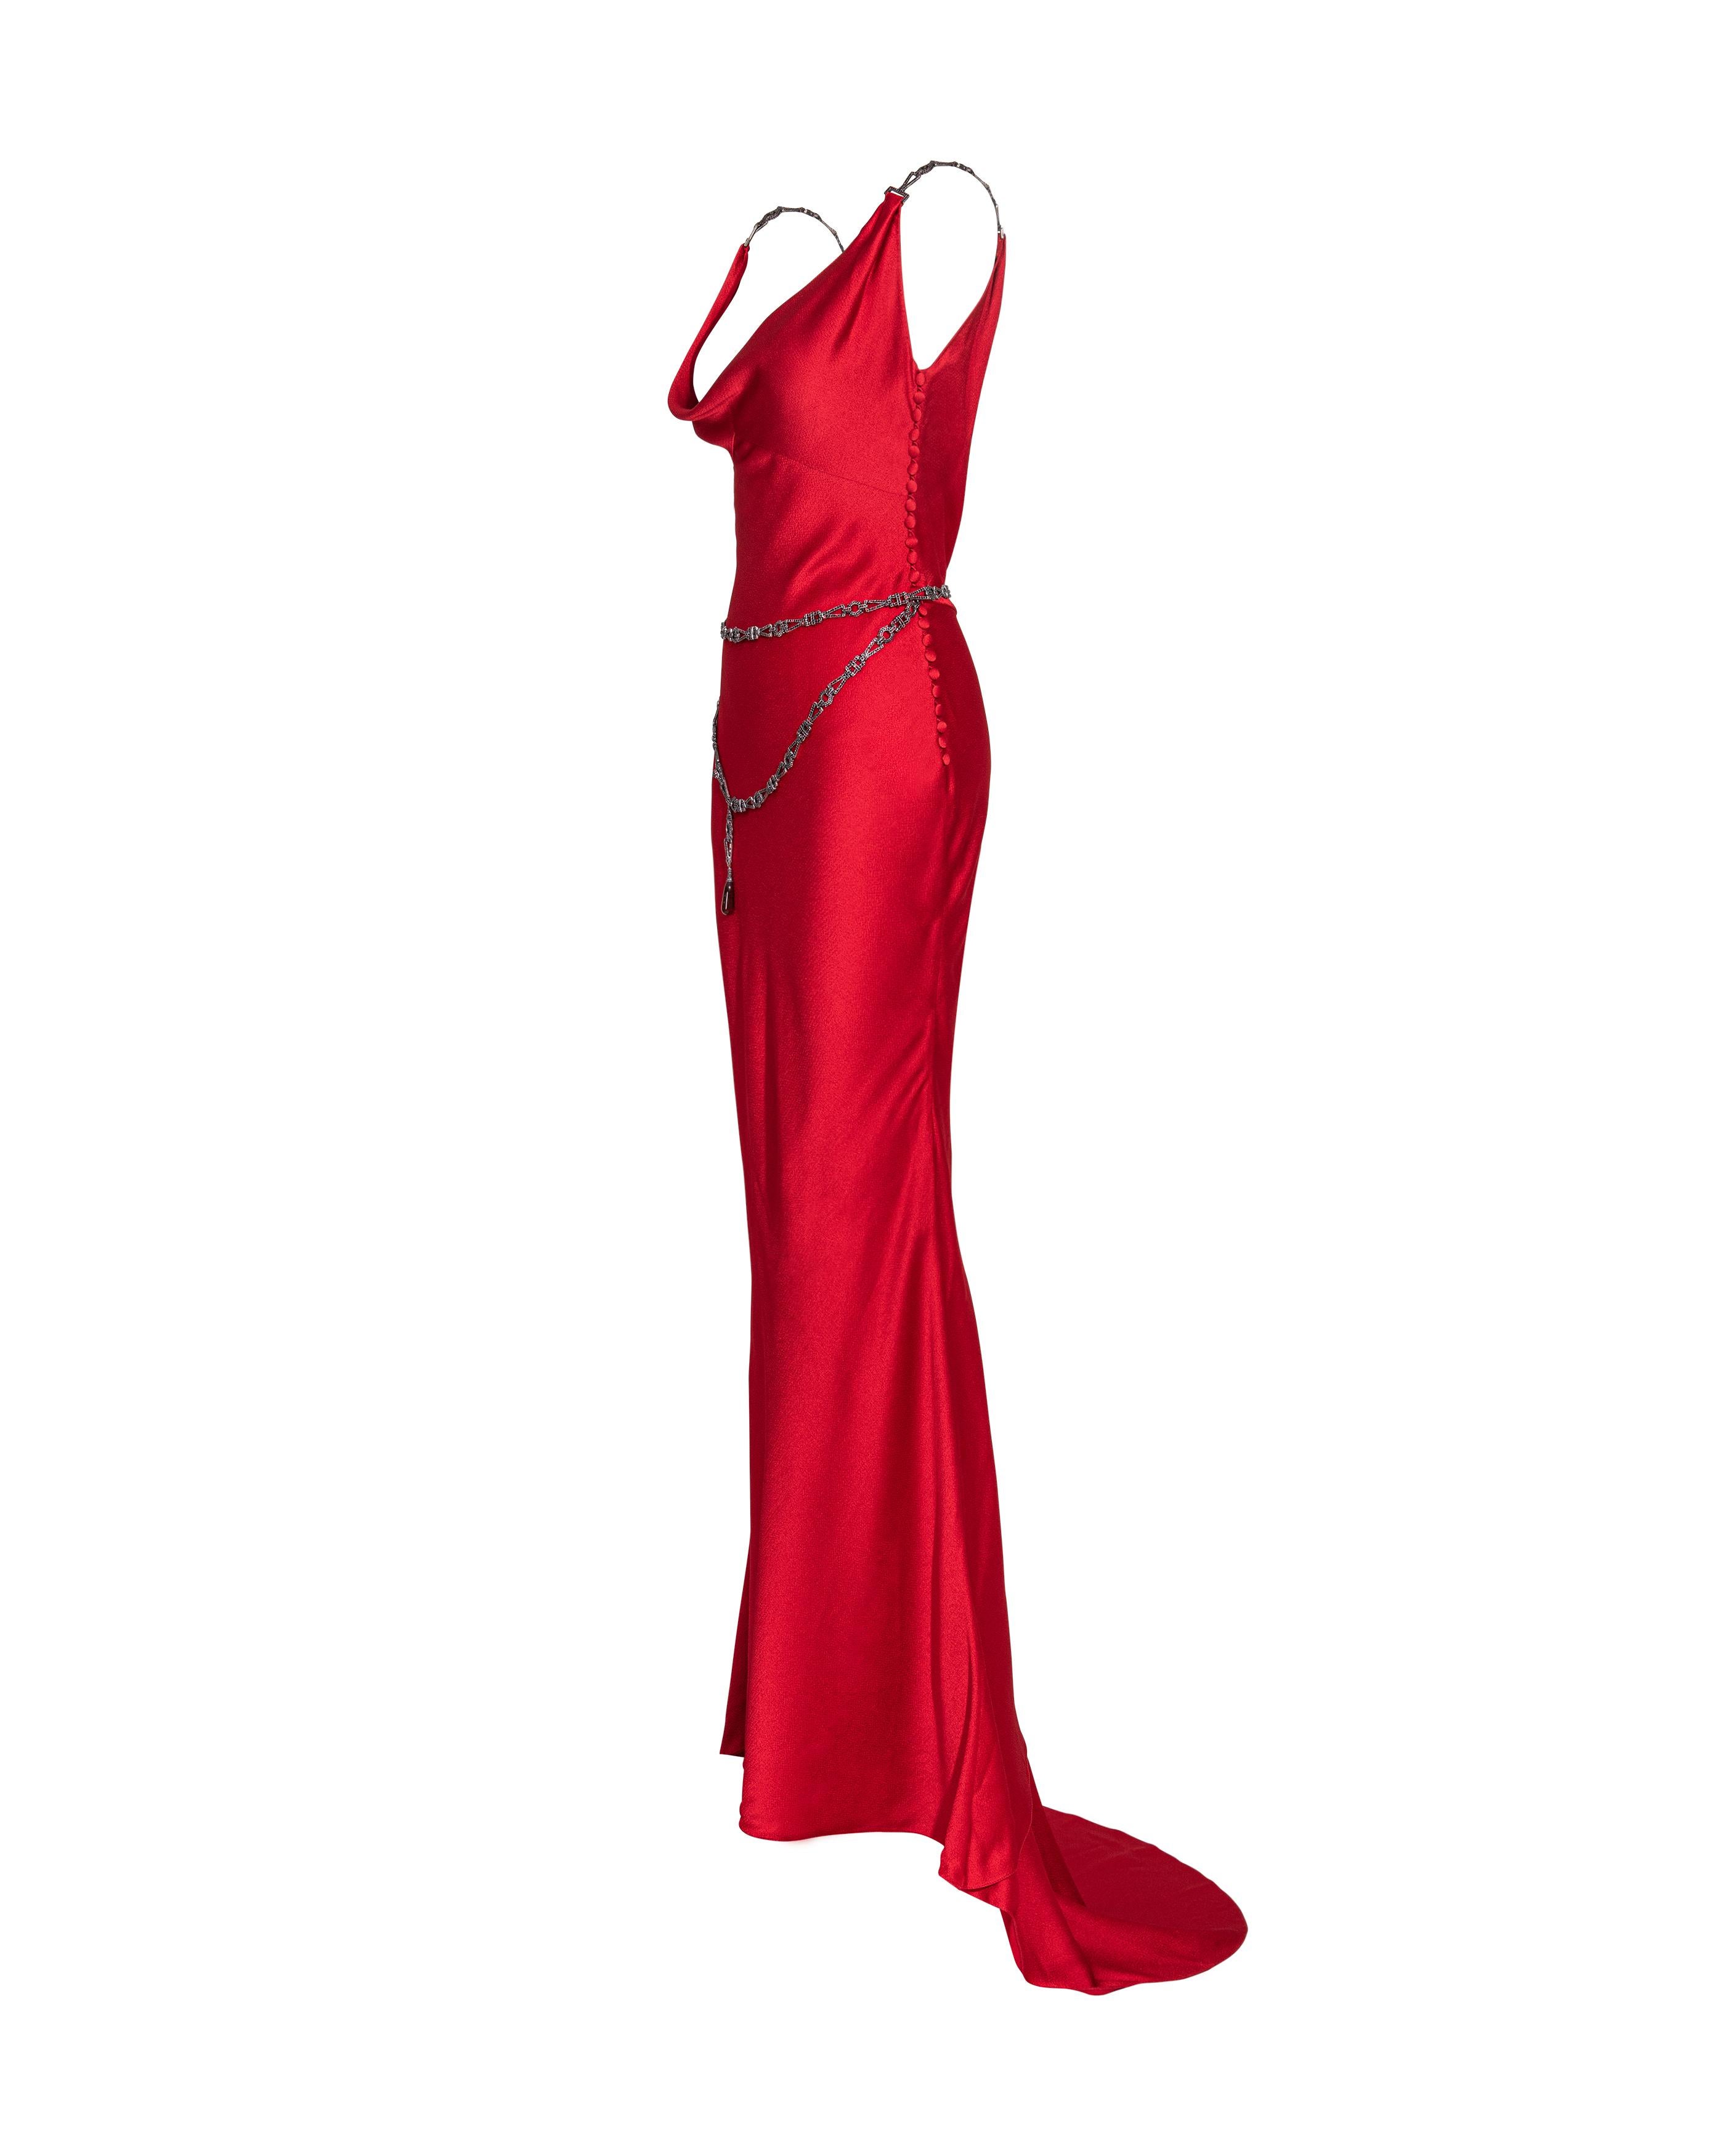 S/S 2000 Christian Dior by John Galliano red bias cut sleeveless gown with jeweled belt. Cowl neck bias cut slip gown. Gunmetal metallic geometric straps and waist belt with red rhinestone encrusted details throughout and oxblood colored gemstone